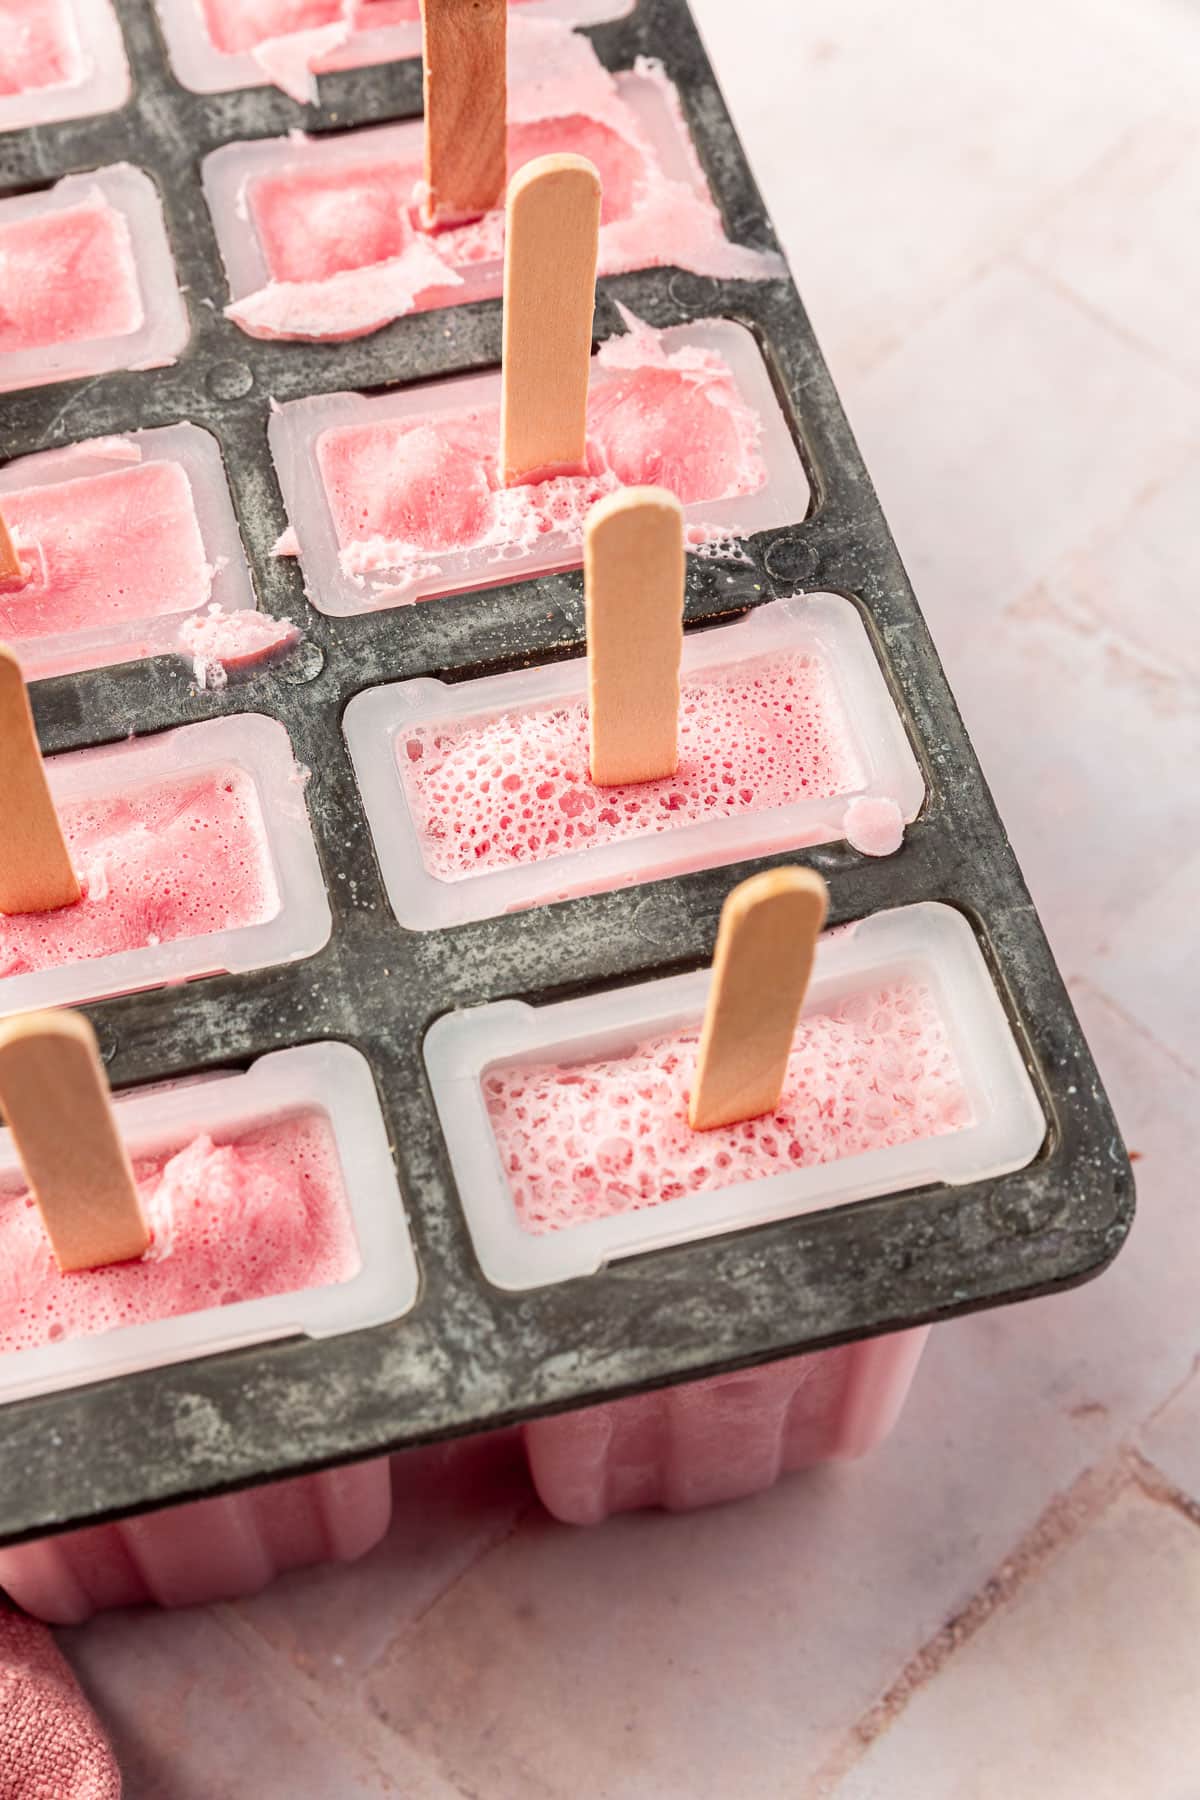 A popsicle mold tray filled with frozen strawberry popsicles with popsicle sticks in them.